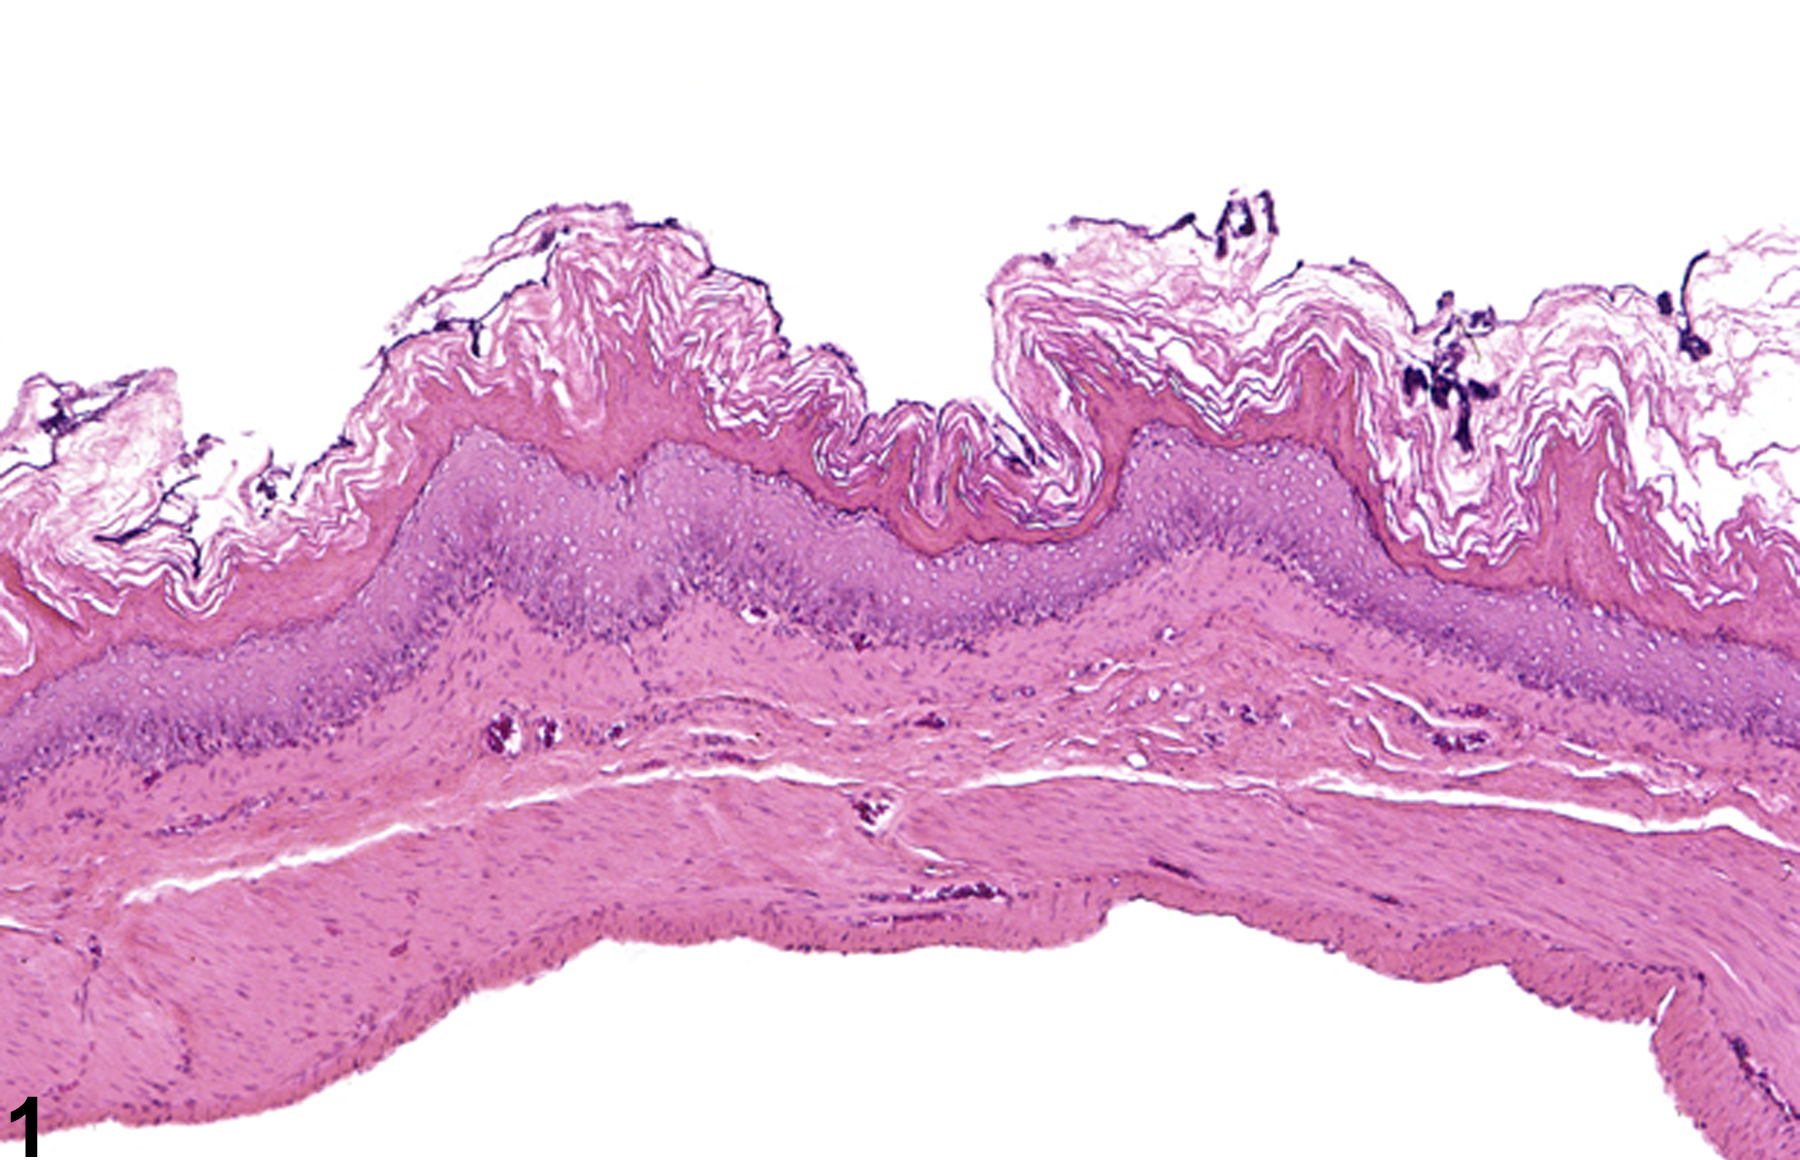 Image of hyperkeratosis in the forestomach from a male F344/N rat in a subchronic study